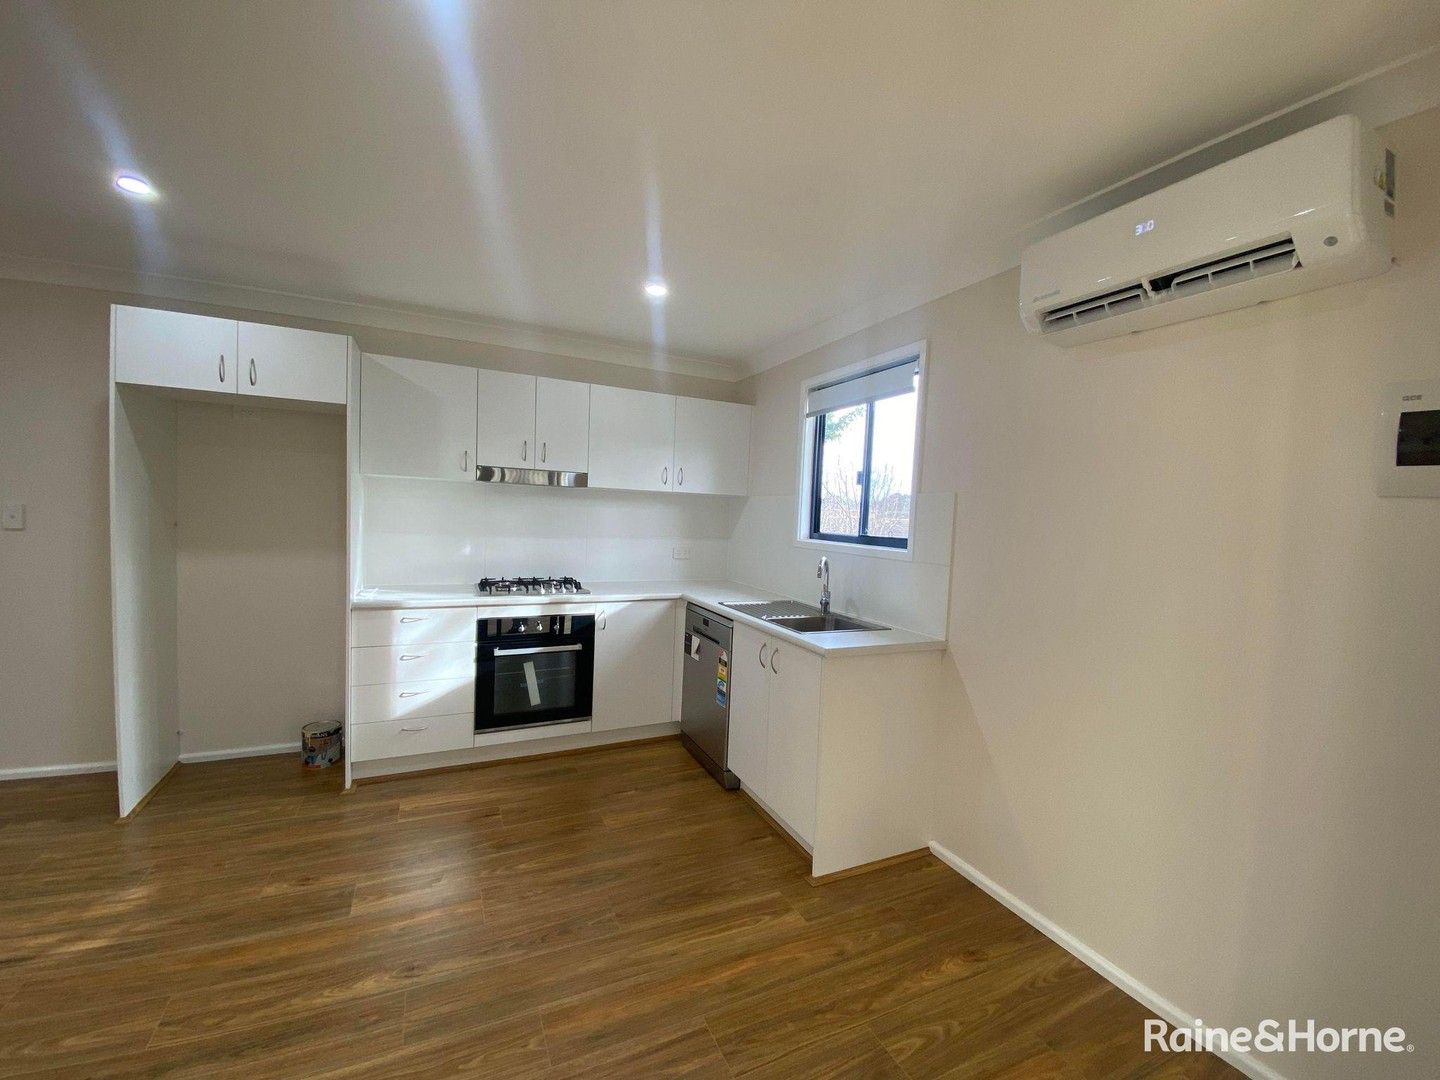 2 bedrooms Apartment / Unit / Flat in 2/6 Barber St GOULBURN NSW, 2580